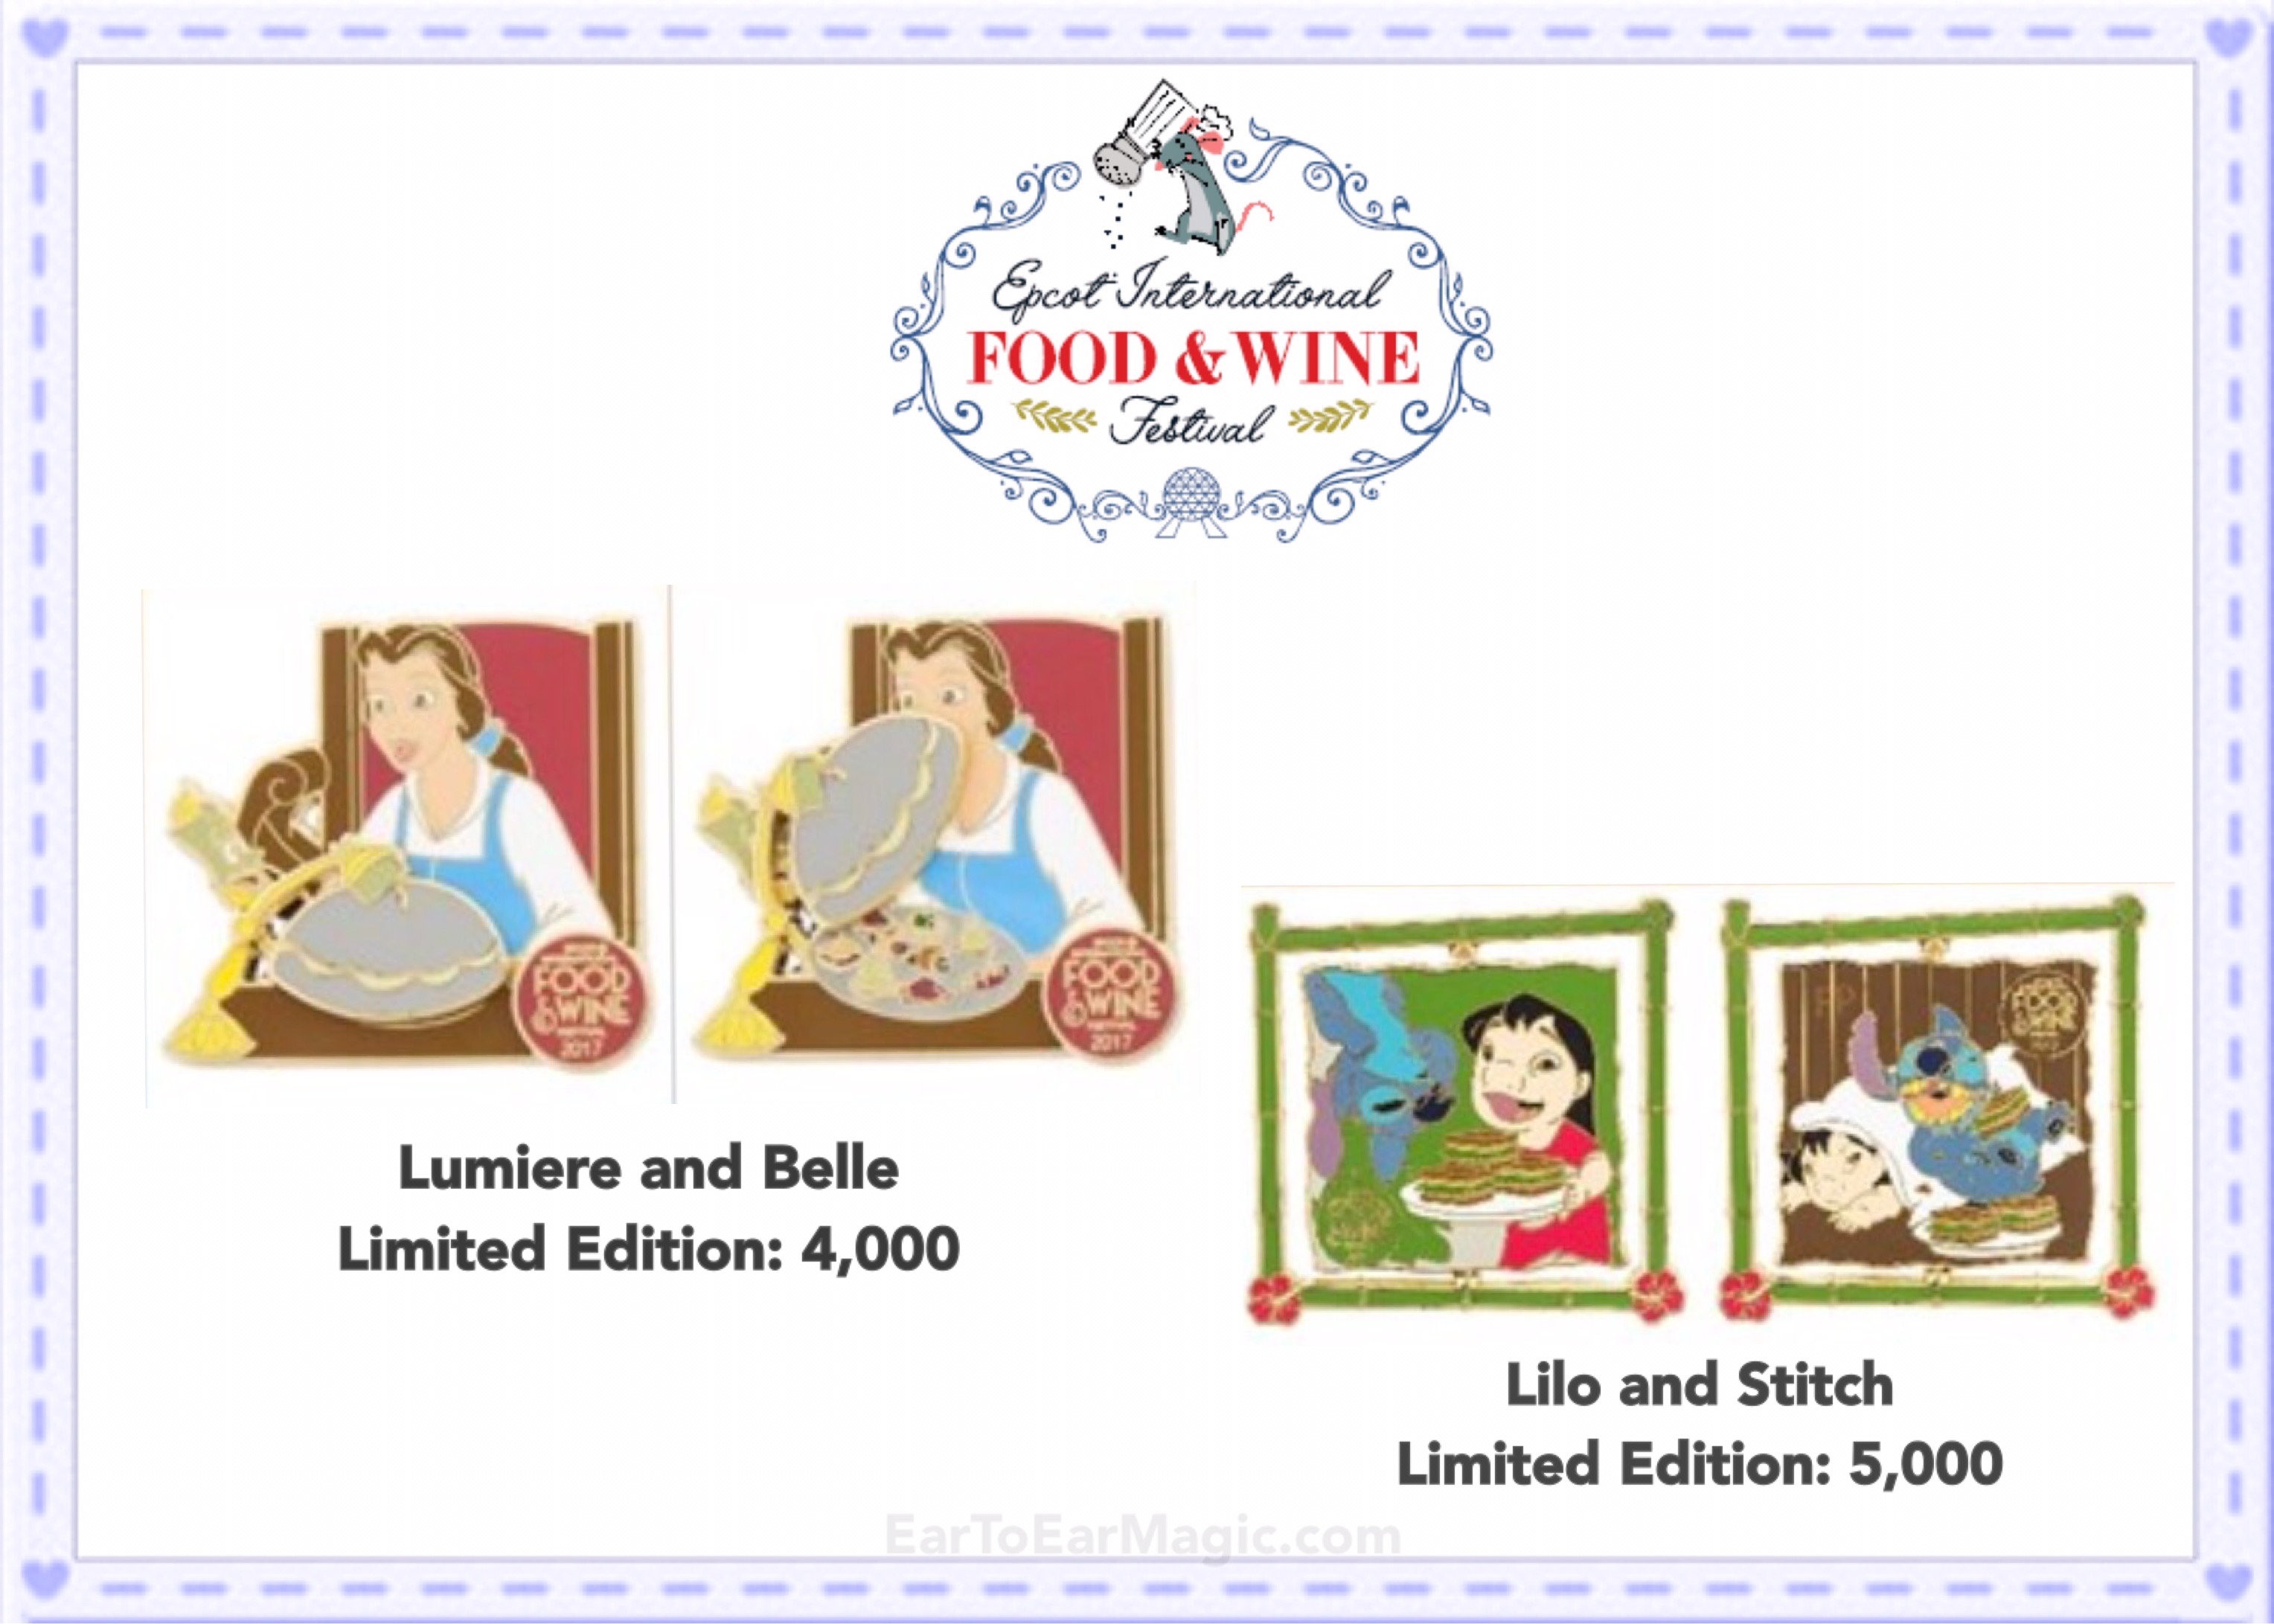 Disney Trading Pins for the 2017 Epcot Food and Wine Festival